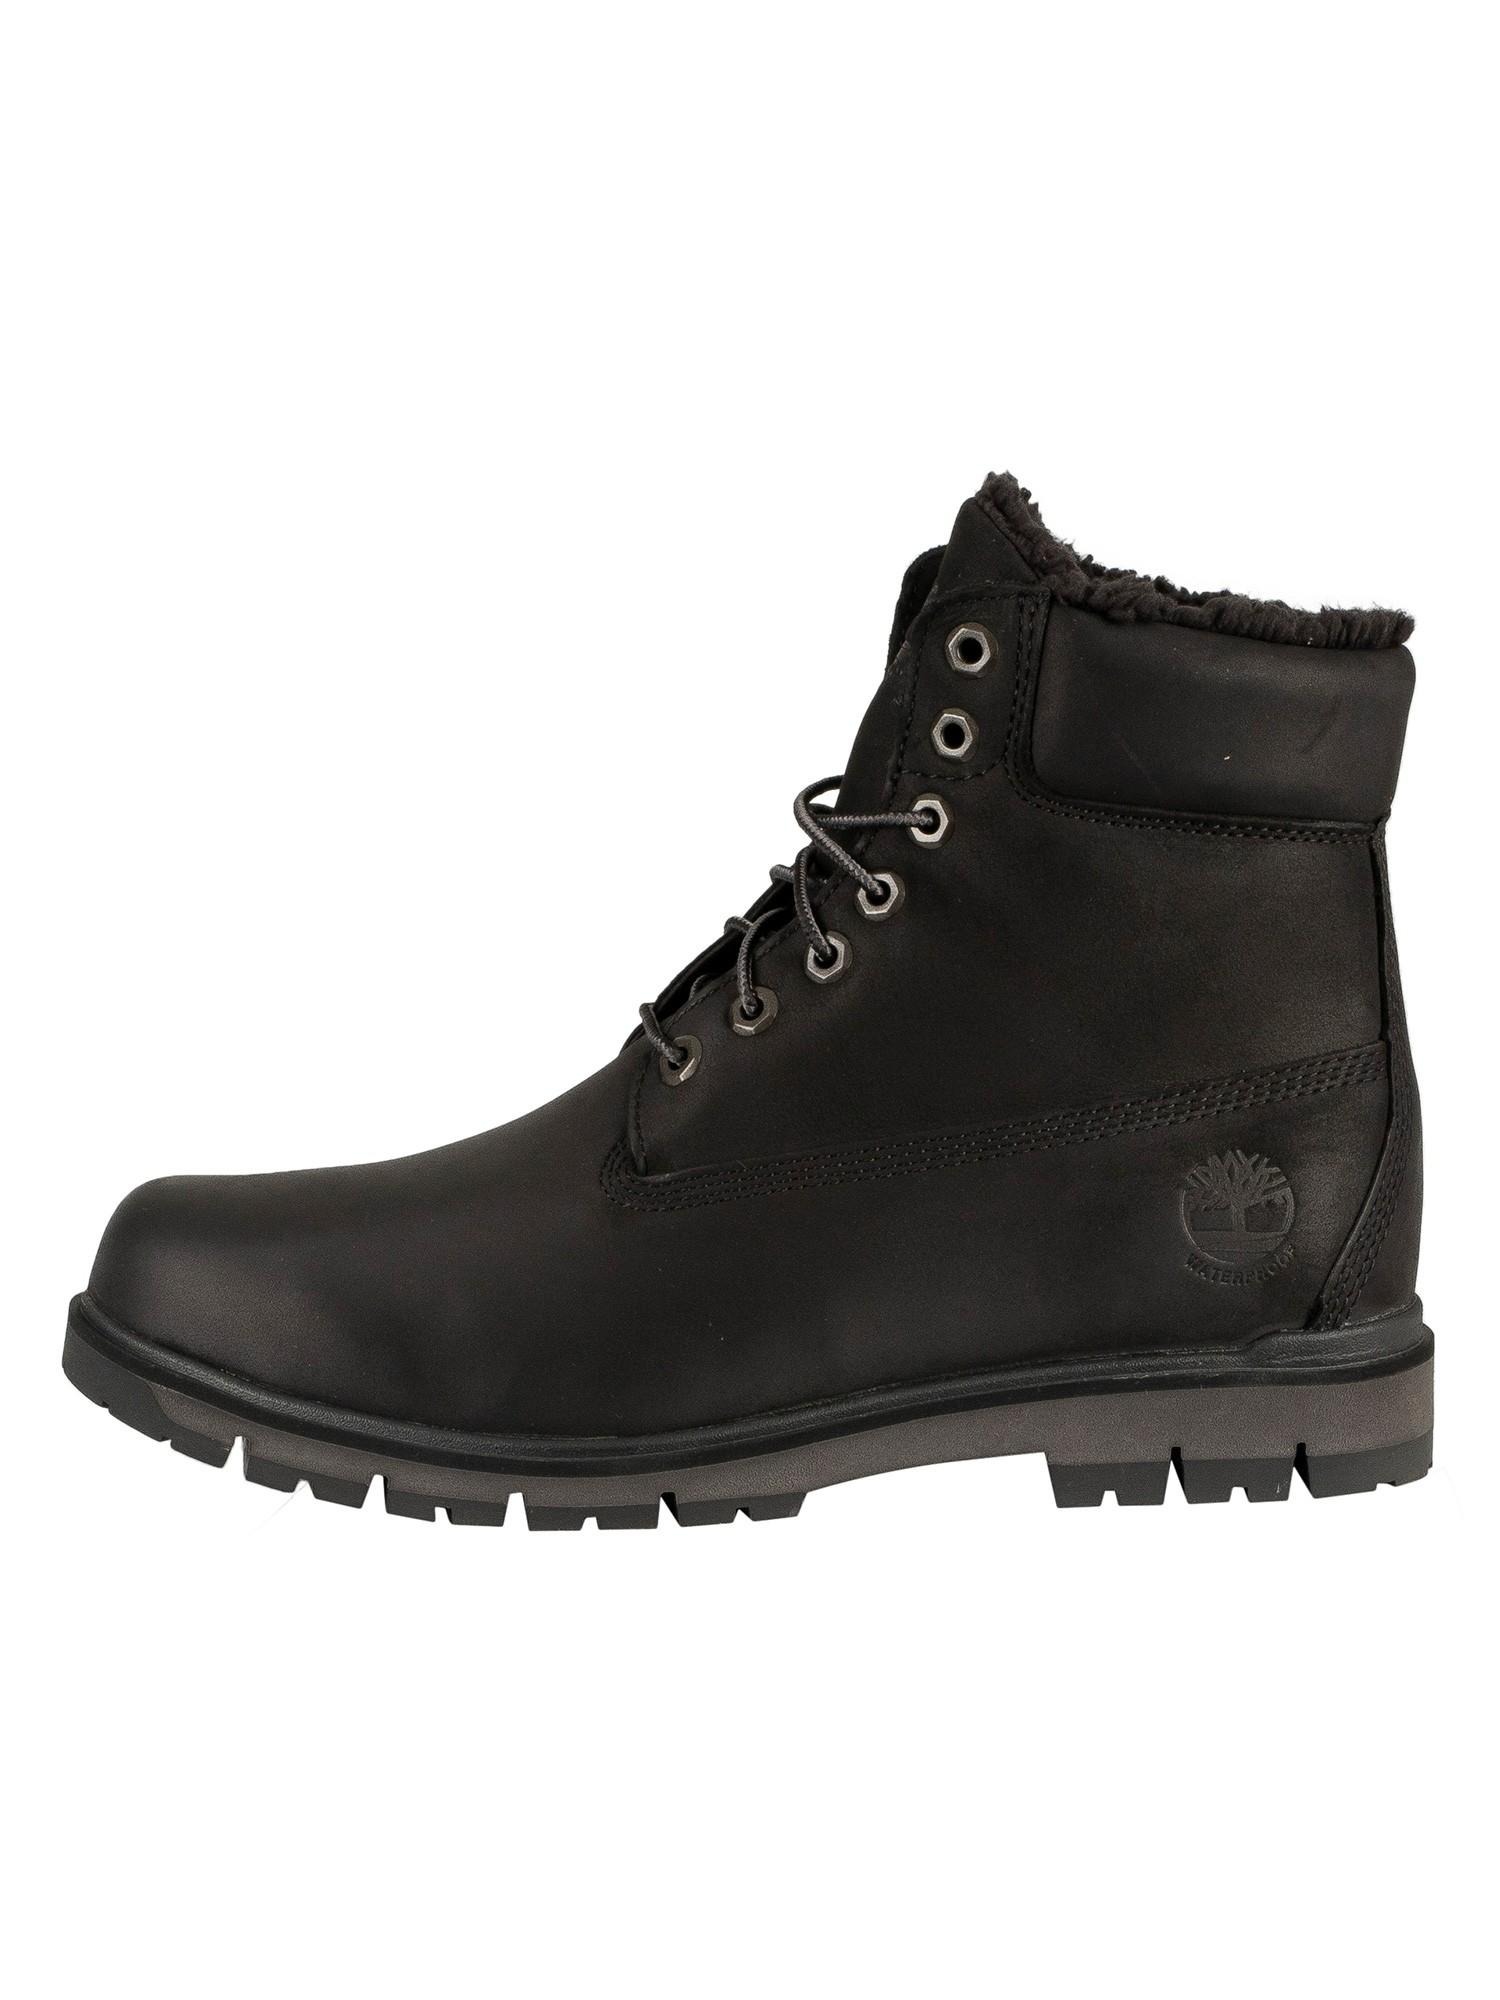 Timberland Radford Warm Lined Leather Boots in Black Nubuck (Black) for Men  - Lyst